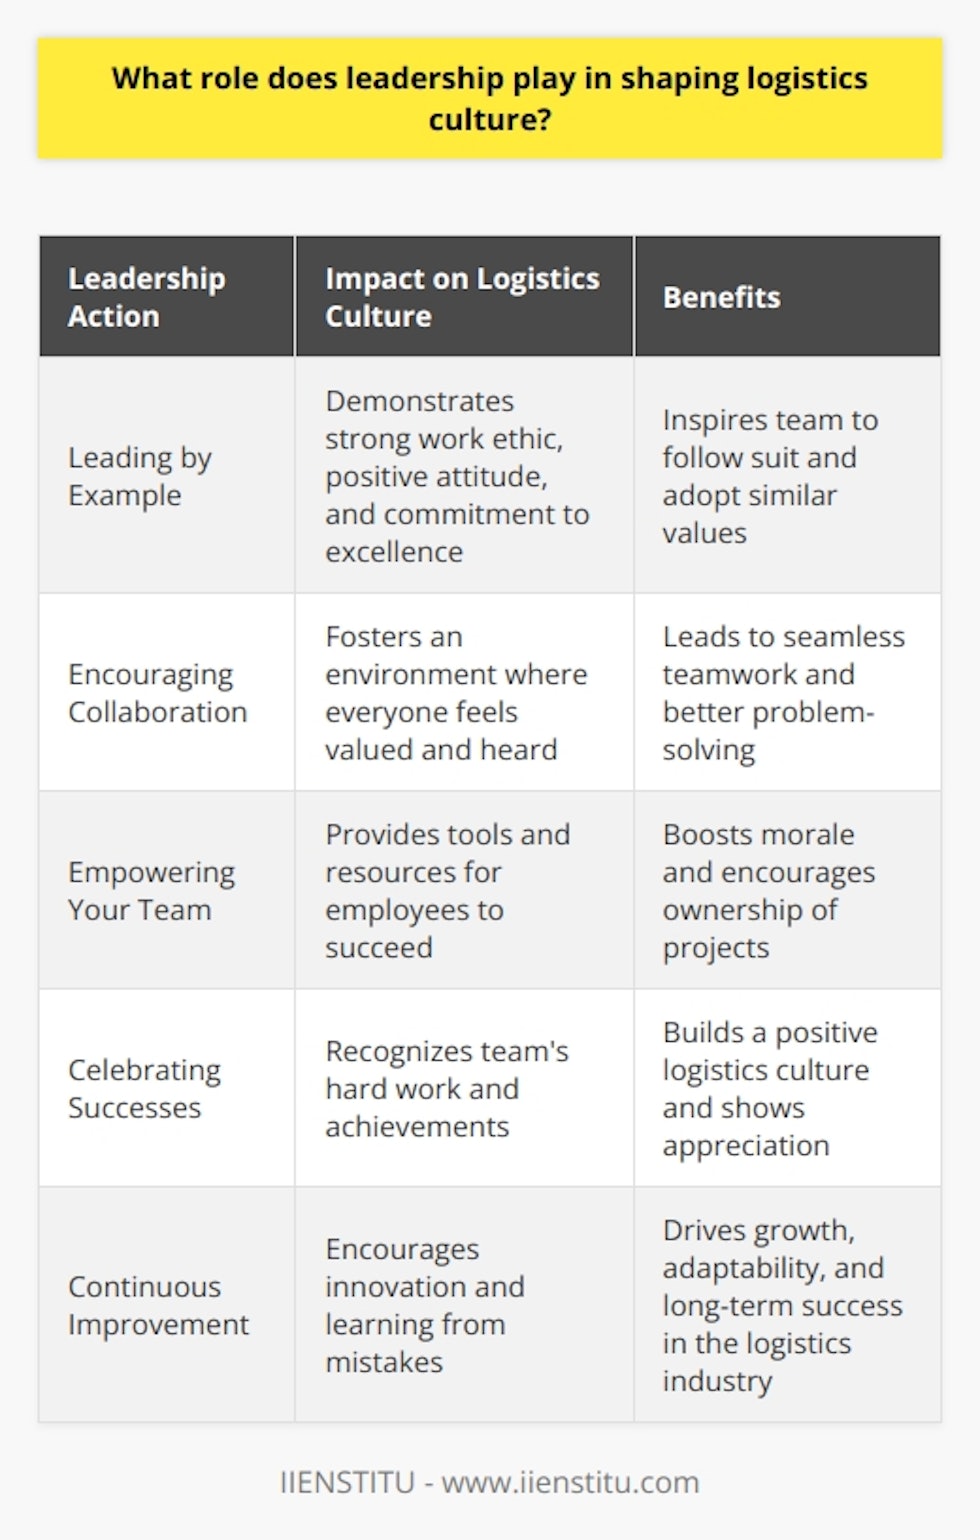 Leadership plays a crucial role in shaping logistics culture. As a leader, you set the tone and direction for your team. Your actions, words, and decisions influence how your employees approach their work and interact with each other. Leading by Example One of the most effective ways to shape logistics culture is by leading by example. When you demonstrate a strong work ethic, a positive attitude, and a commitment to excellence, your team will follow suit. Theyll see that youre not just talking the talk, but walking the walk as well. Encouraging Collaboration Another key aspect of leadership in logistics is encouraging collaboration. In my experience, the most successful teams are those that work together seamlessly. As a leader, its your job to foster an environment where everyone feels valued and heard. Encourage open communication, and create opportunities for your team to work together on projects. Empowering Your Team Empowering your team is also essential. When you give your employees the tools and resources they need to succeed, theyll feel more invested in their work. Trust them to make decisions and take ownership of their projects. This not only boosts morale but also leads to better results. Celebrating Successes Finally, dont forget to celebrate successes along the way. When your team achieves a goal or completes a project, take the time to recognize their hard work. This can be as simple as a heartfelt thank you or a small celebration. Showing your appreciation will go a long way in building a positive logistics culture. In summary, leadership is essential in shaping logistics culture. By leading by example, encouraging collaboration, empowering your team, and celebrating successes, you can create a positive and productive work environment that drives results.